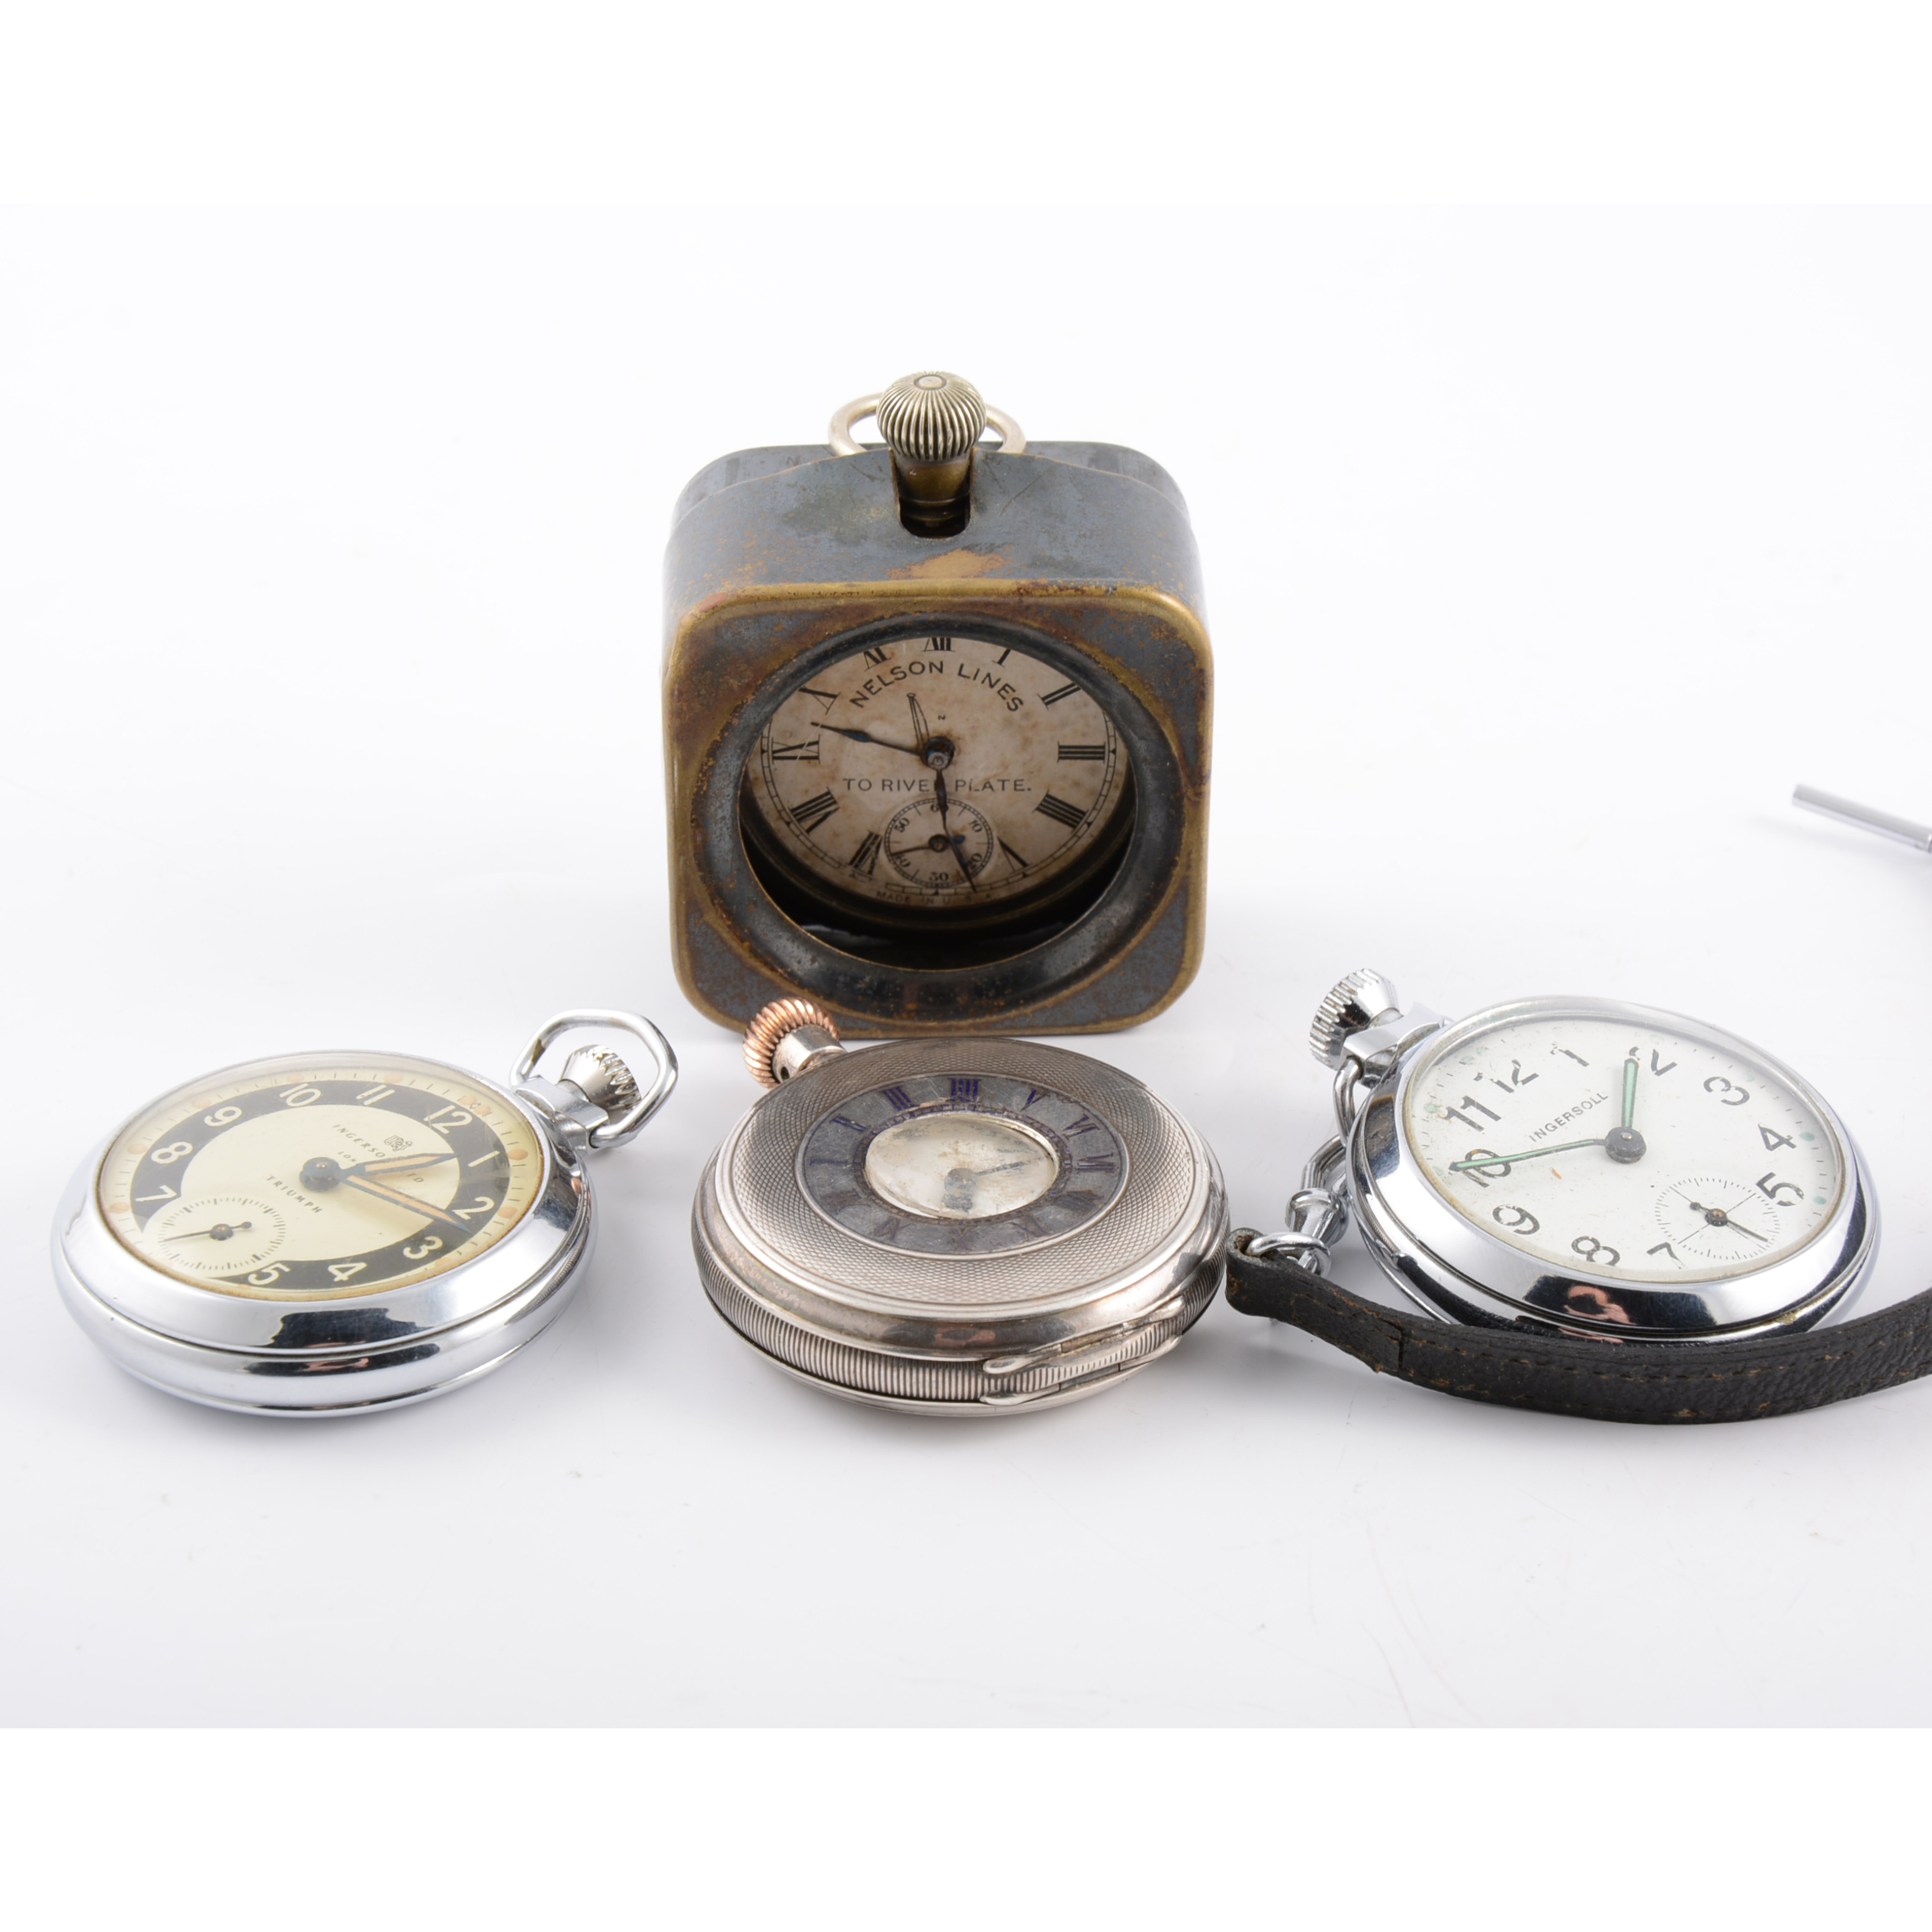 Four pocket watches, two Ingersoll chrome-plated top wind open faced pocket watches,